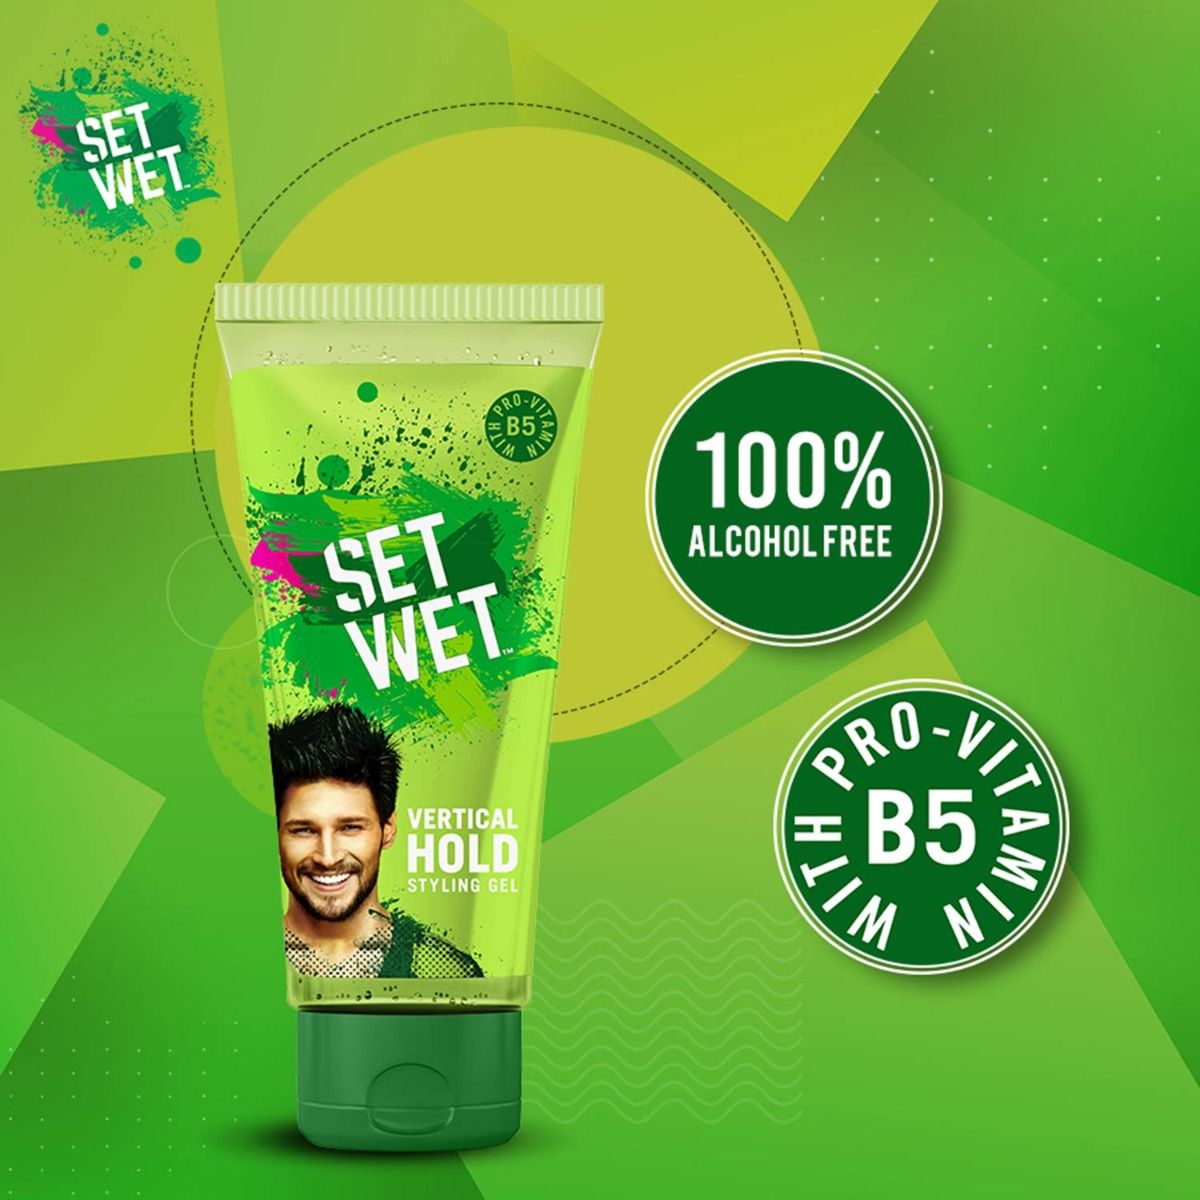 Set Wet Vertical Hold Styling Hair Gel, 50 ml Price, Uses, Side Effects,  Composition - Apollo Pharmacy